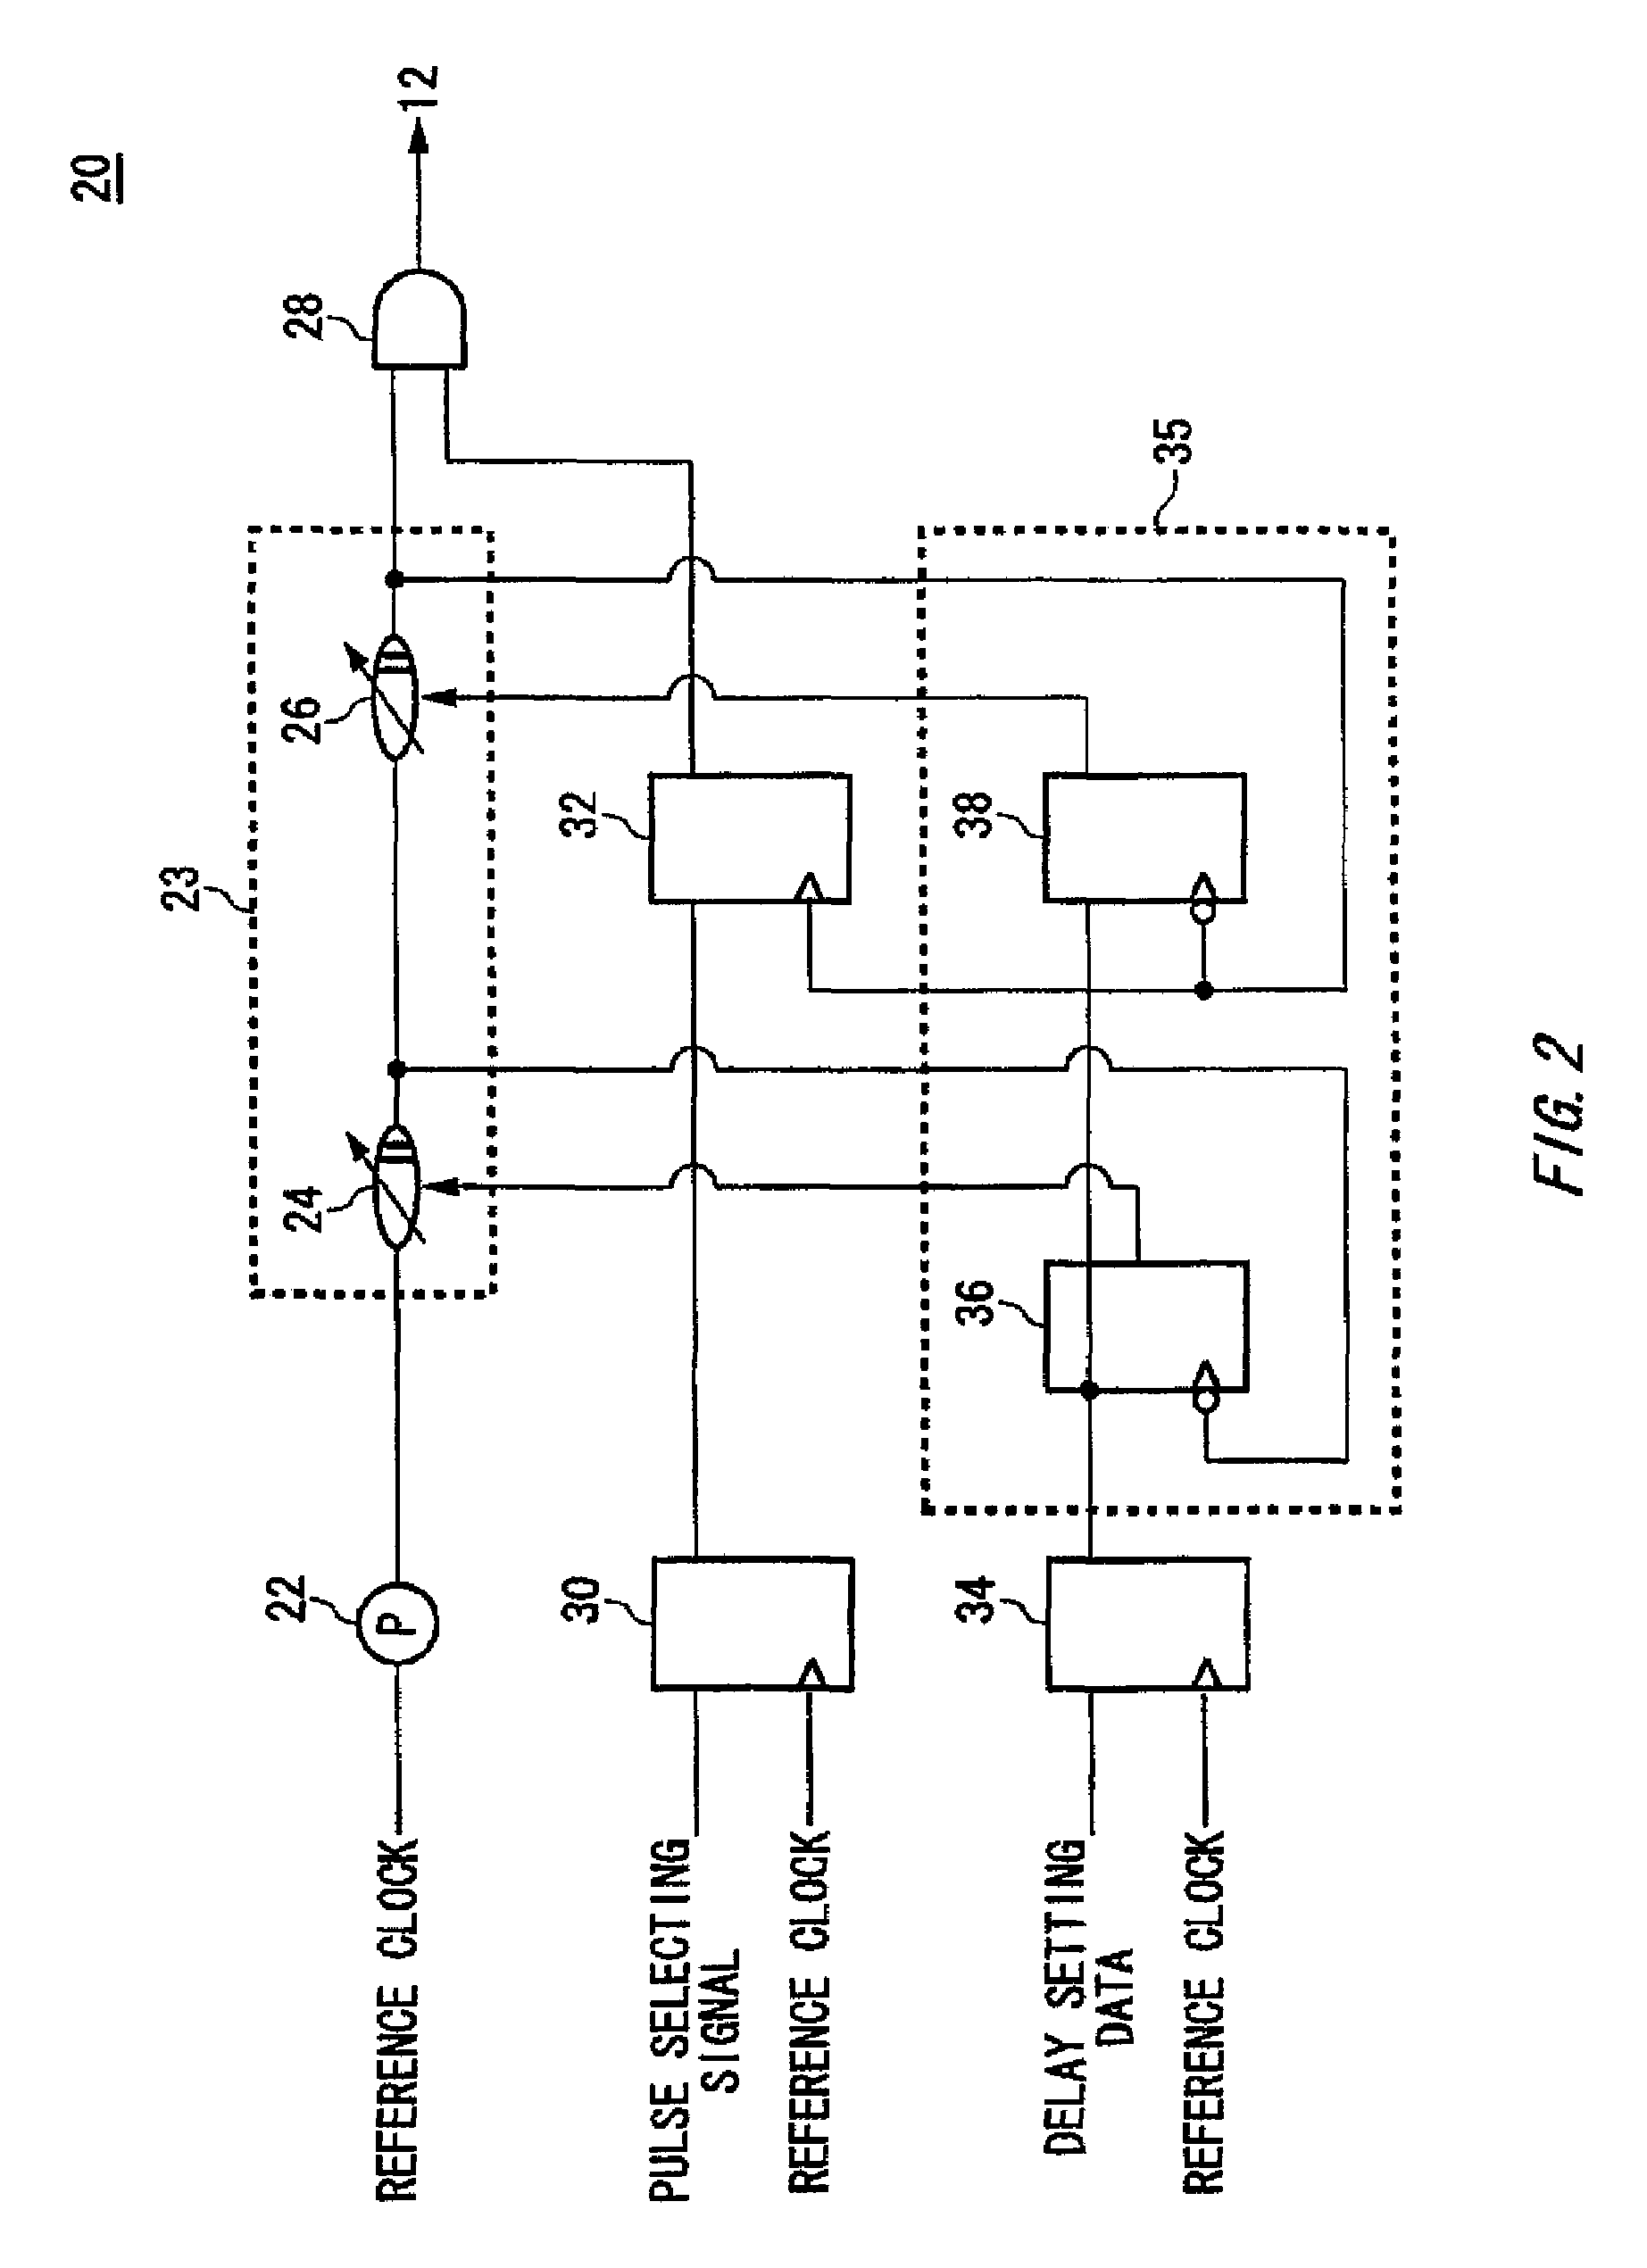 Timing generator and test device